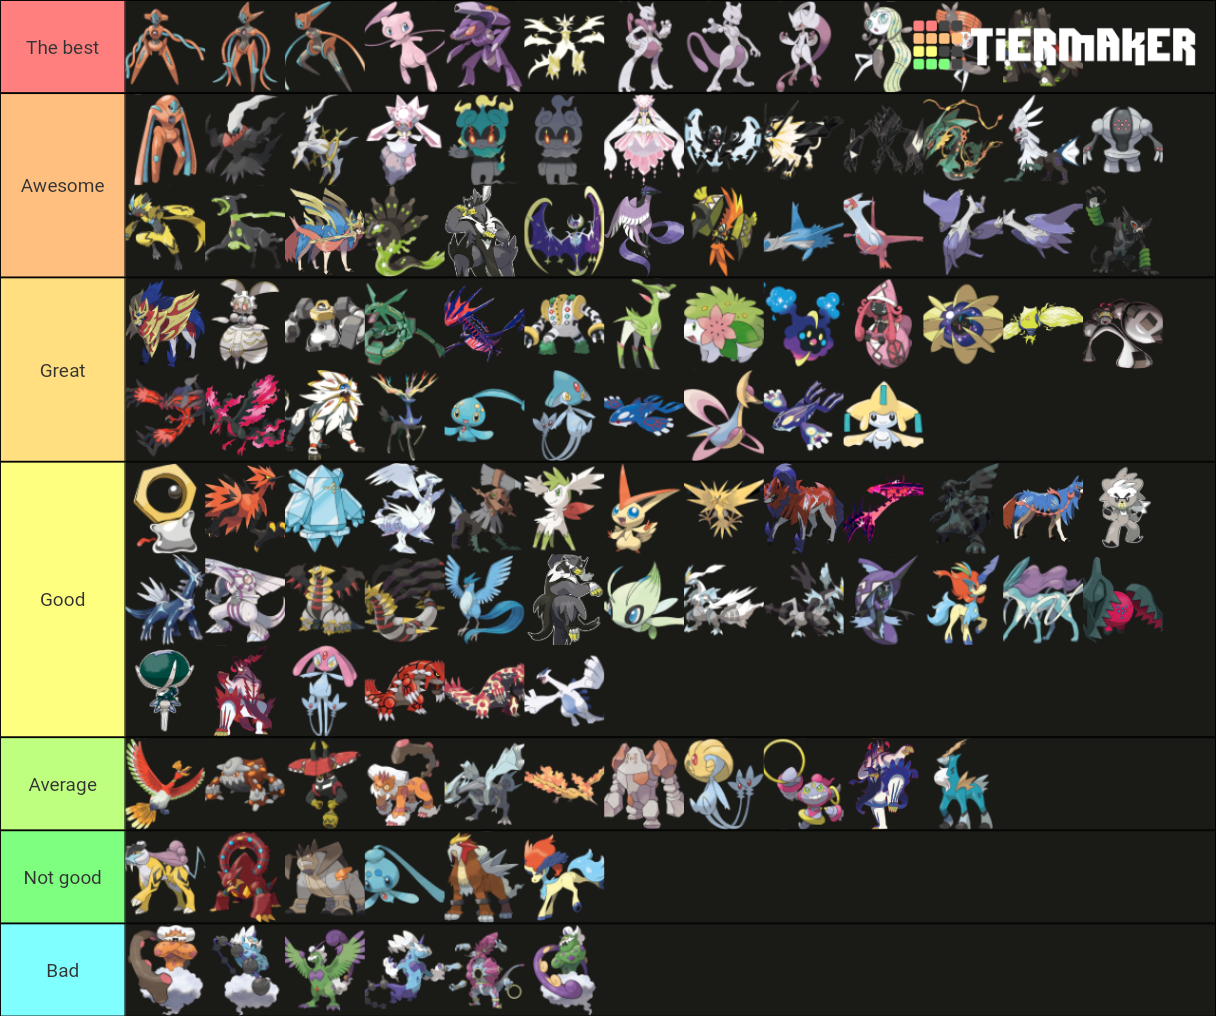 NEW CODE!] The CURRENT BEST LEGENDARY & MYTHICAL Character Tier List!